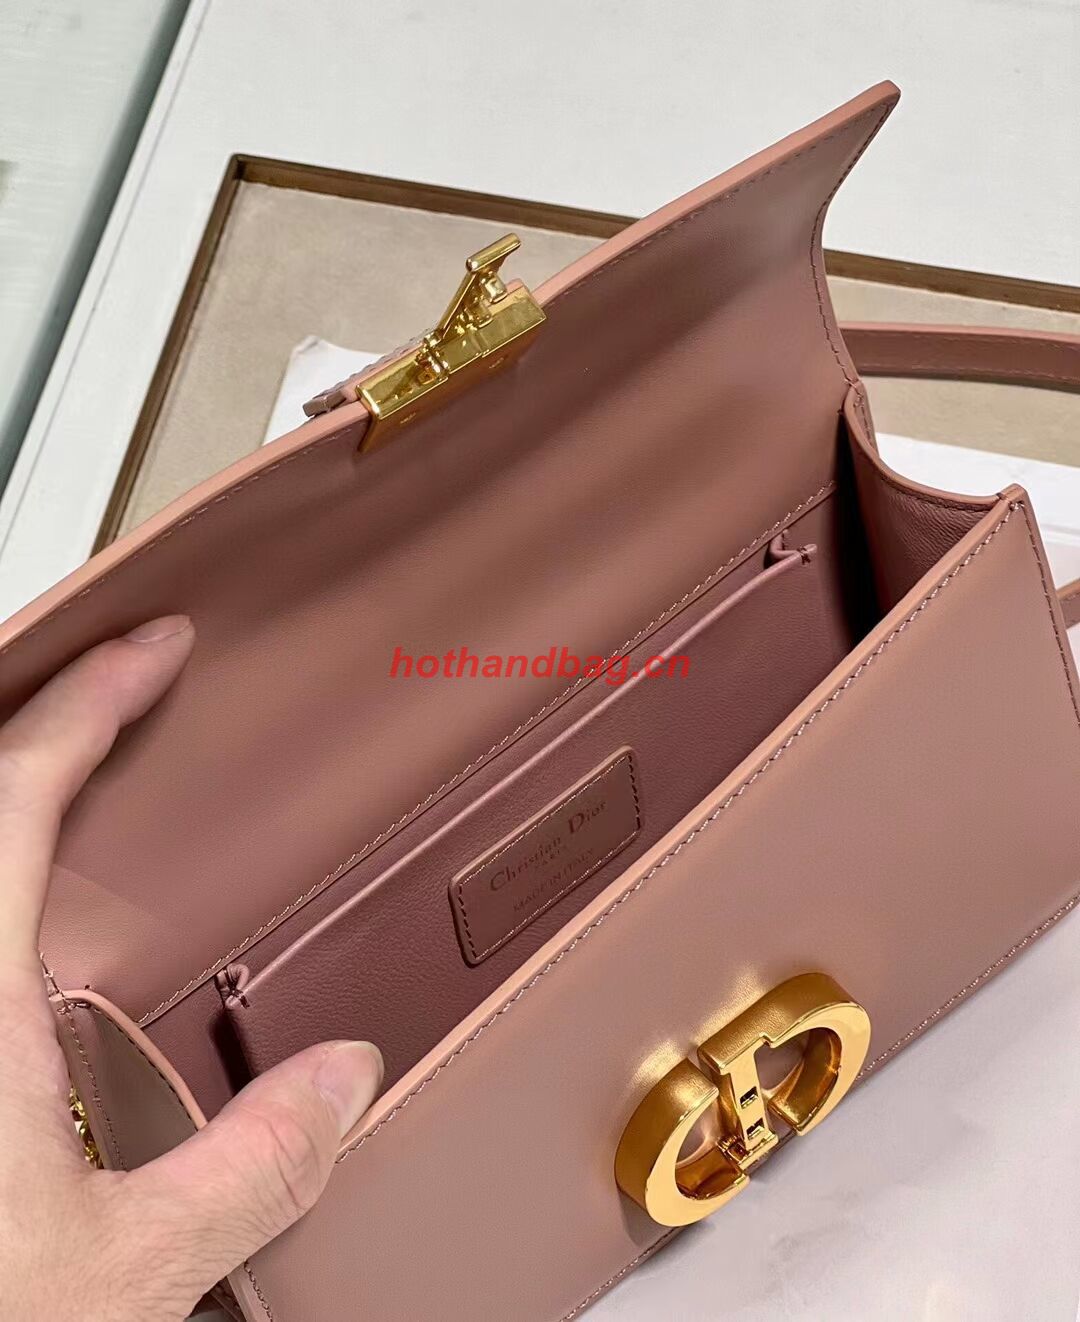 DIOR 30 MONTAIGNE EAST-WEST BAG WITH CHAIN Calfskin M9334 pink